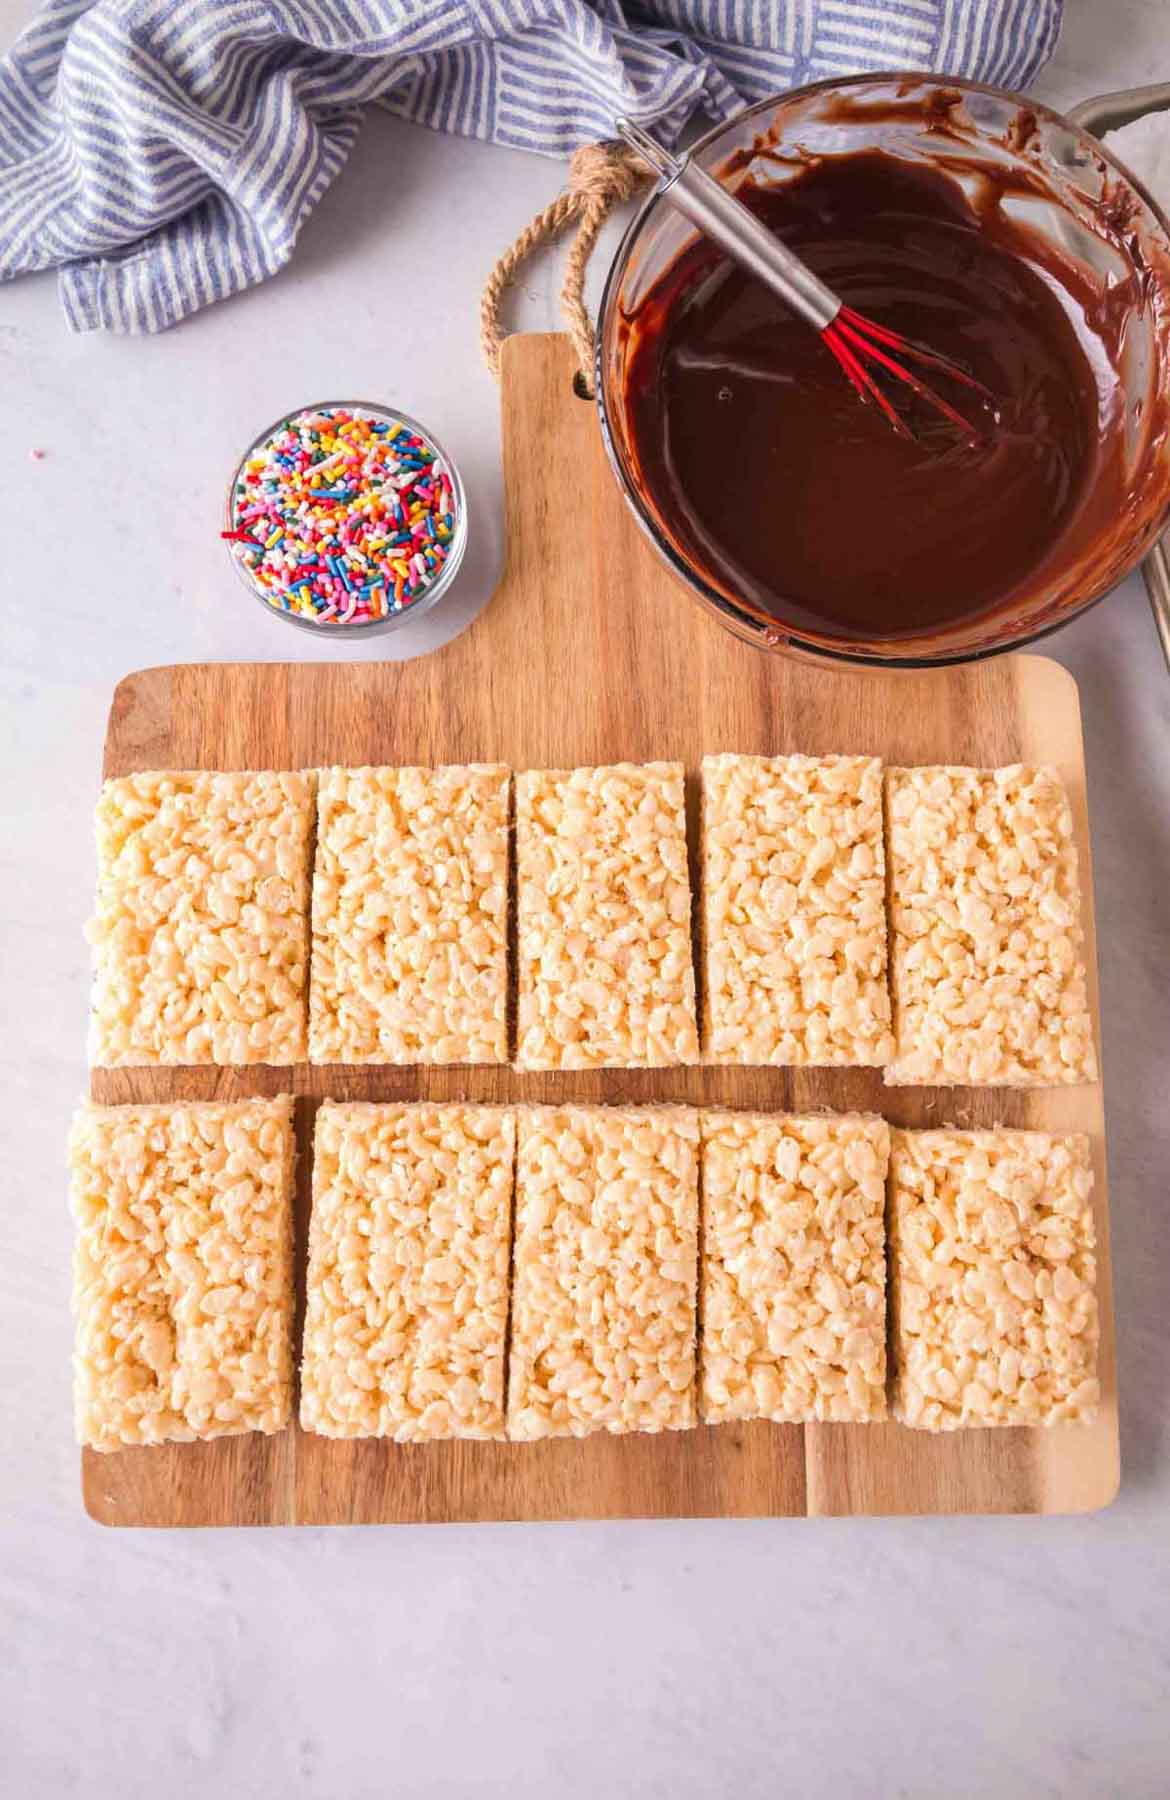 Cut rectangles of rice krispie treats getting ready to be dipped in chocolate.